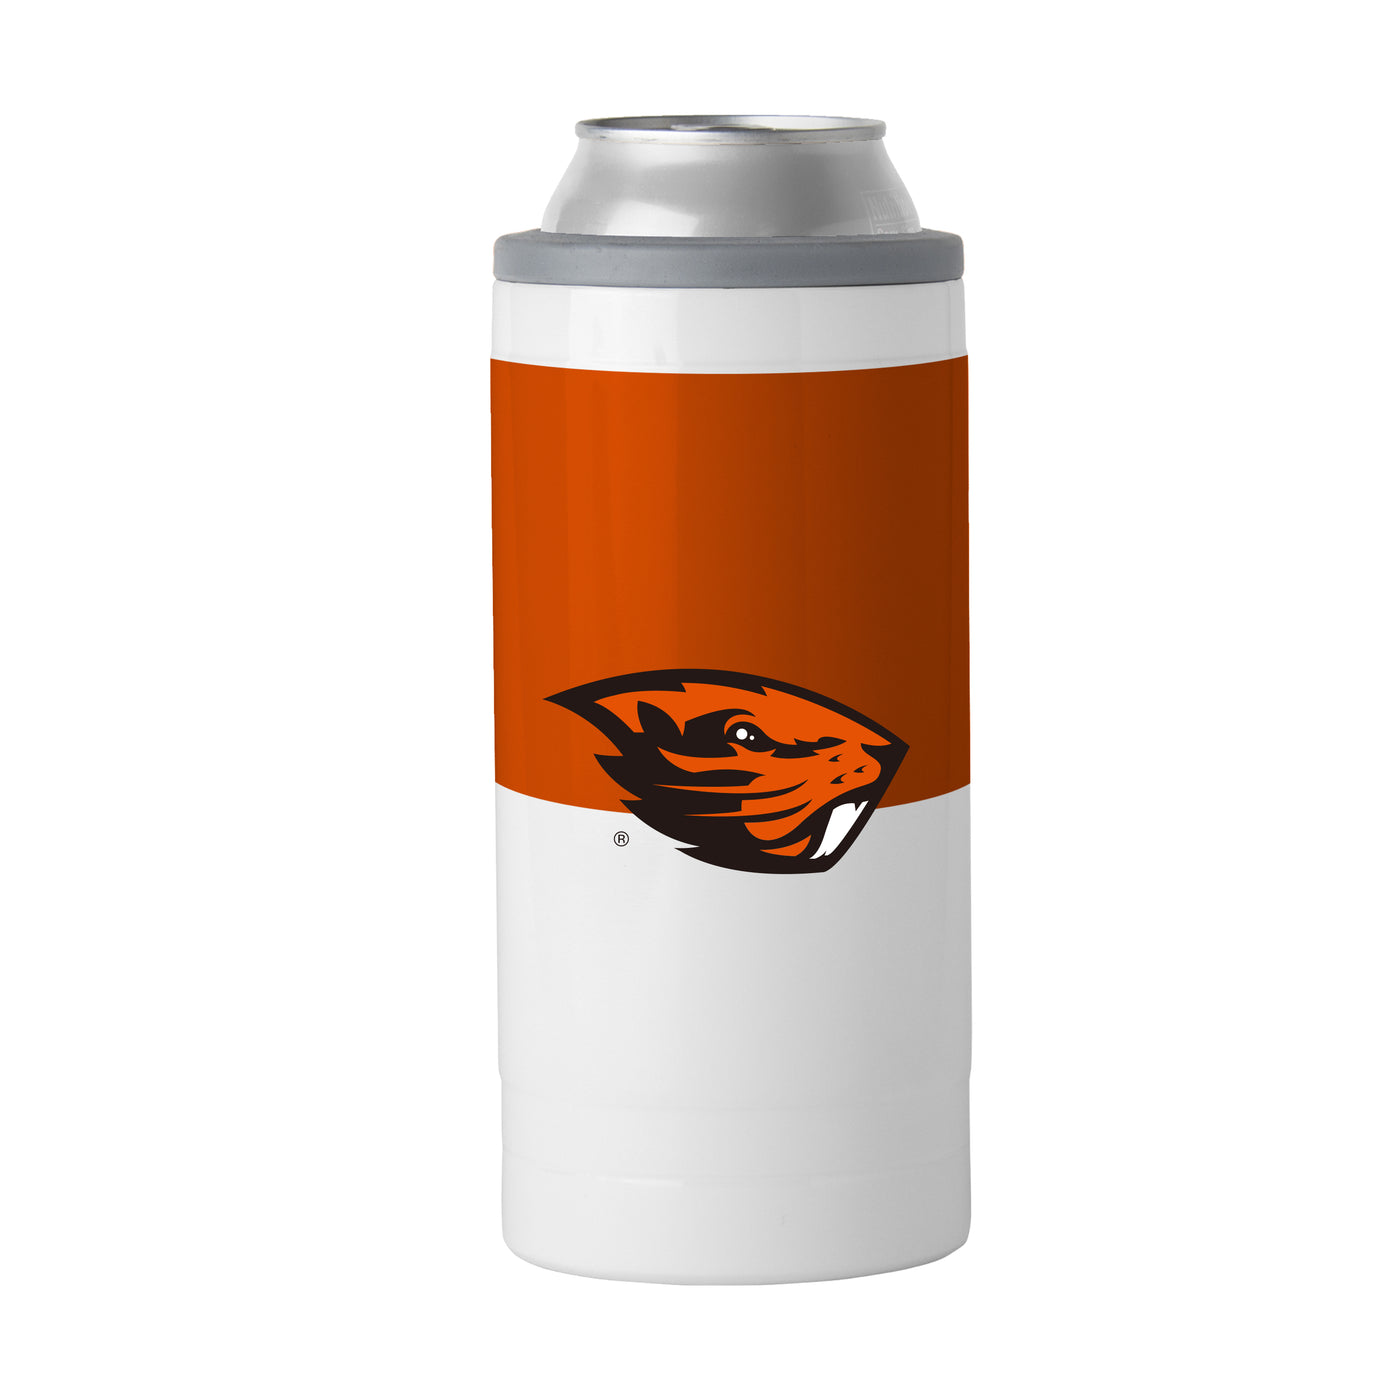 OR State Colorblock 12oz Slim Can Coolie